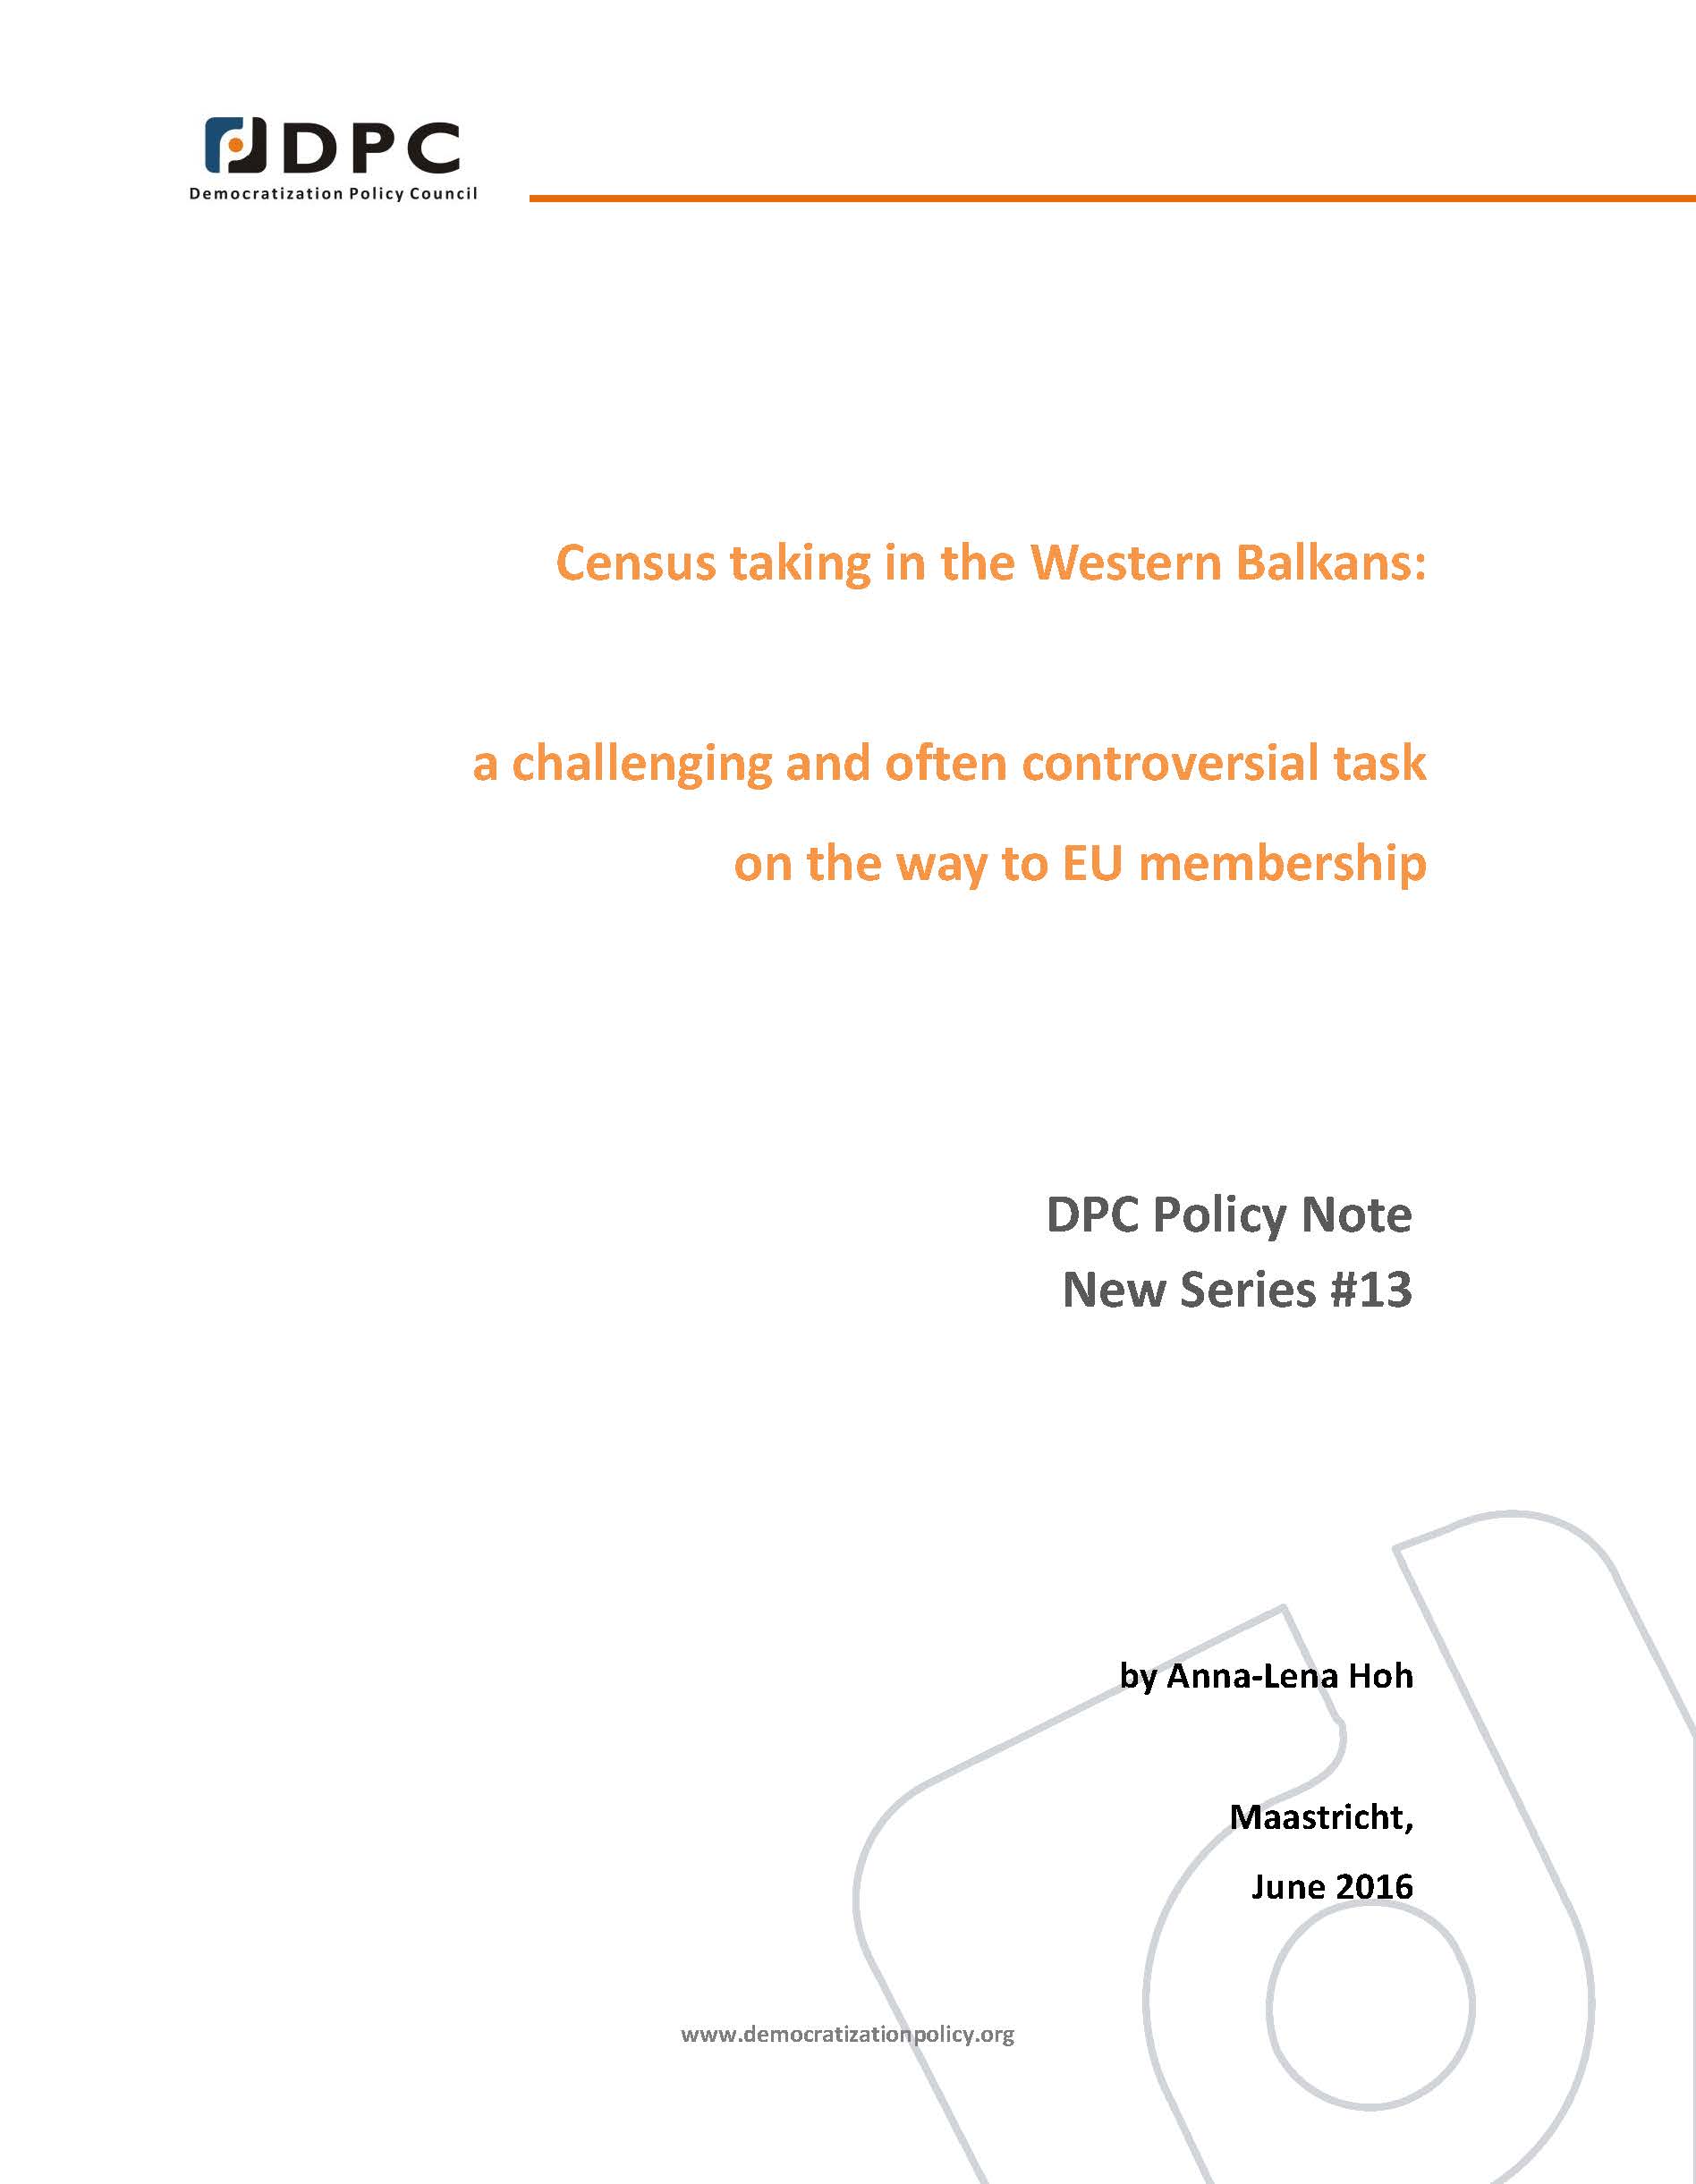 DPC POLICY NOTE 13: Census taking in the Western Balkans: a challenging and often controversial task on the way to EU membership.